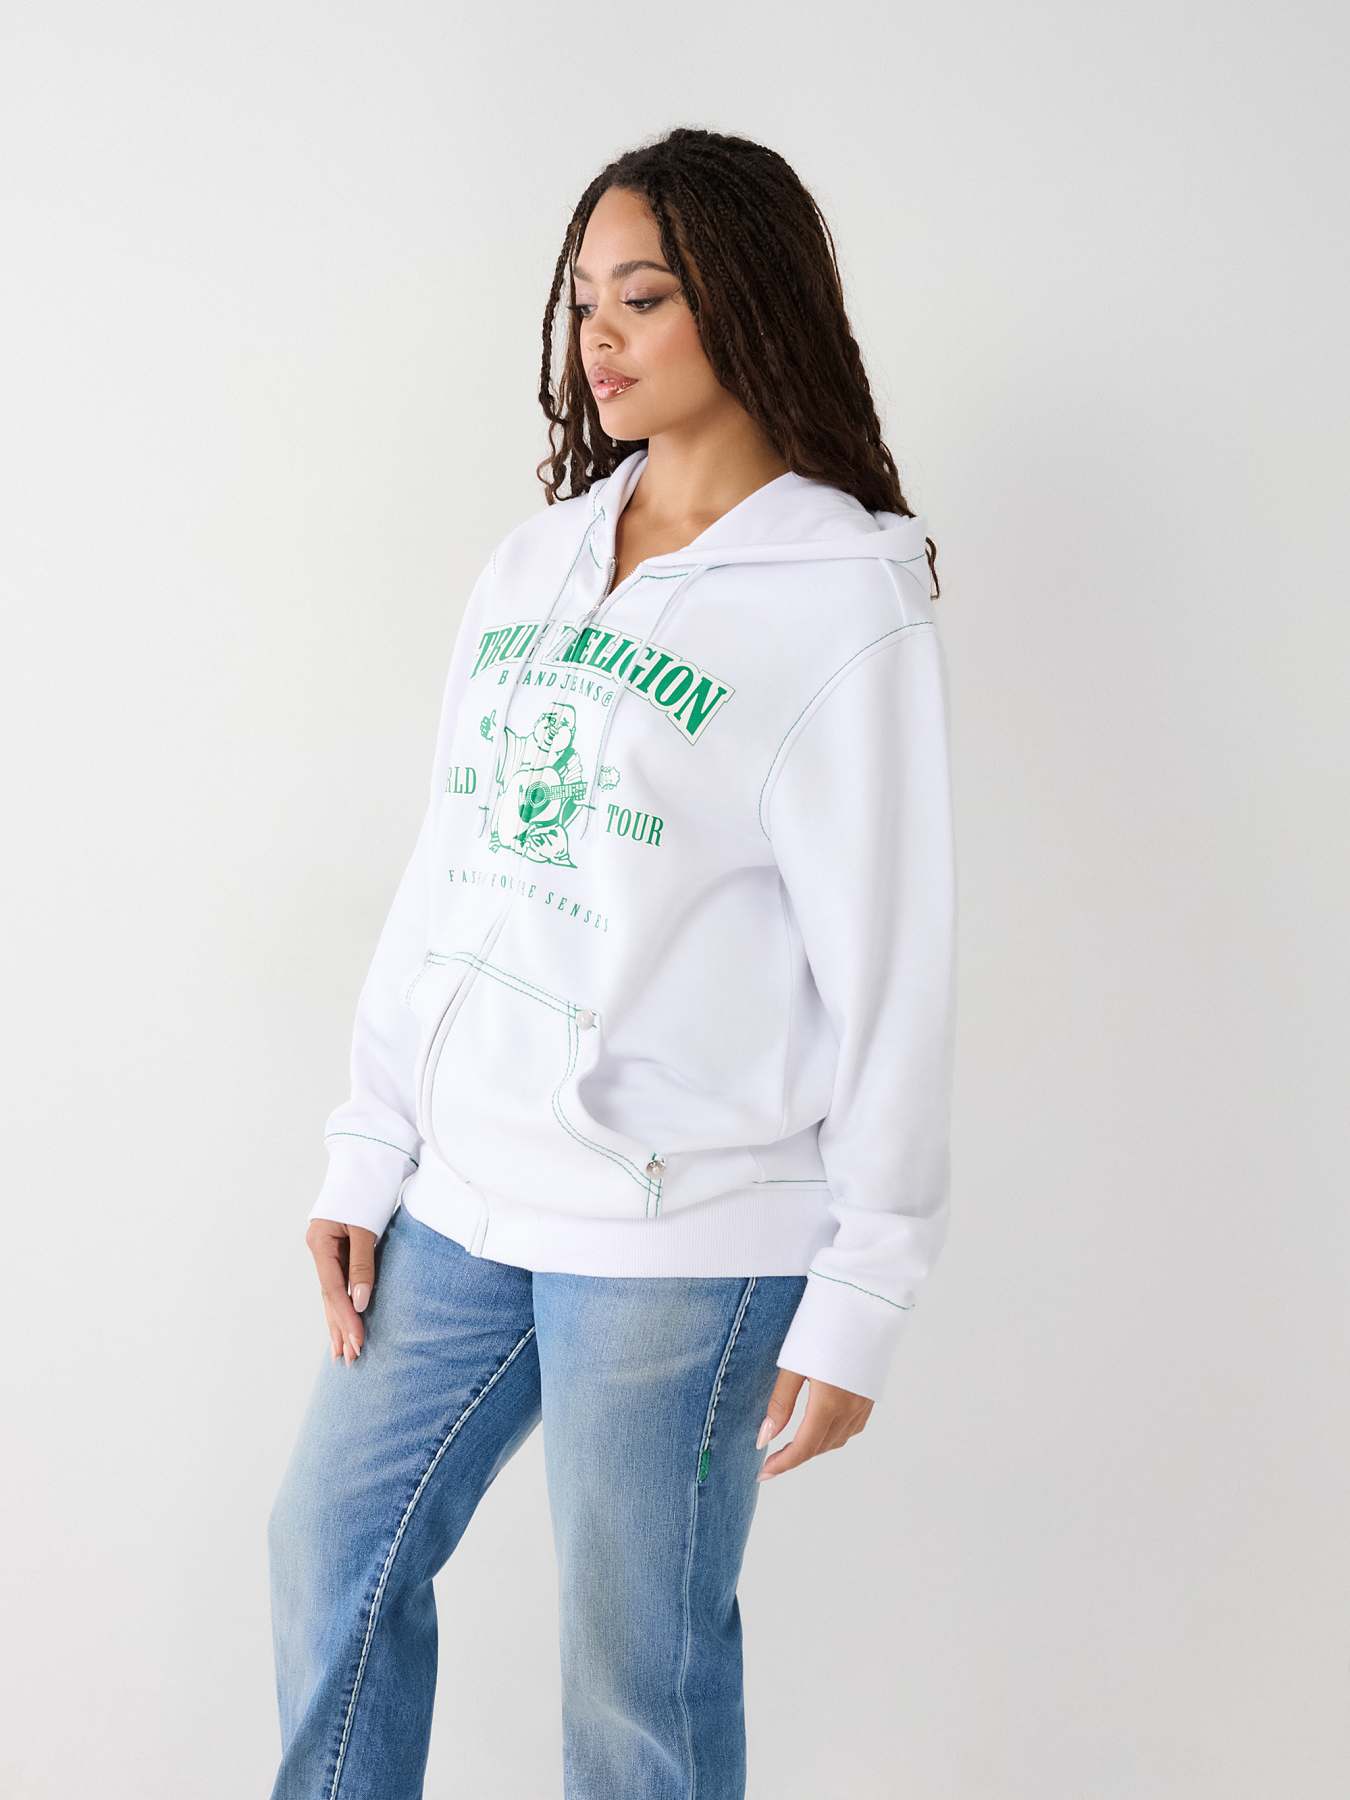 Oversized Sweatshirts Over Leggings Depot  International Society of  Precision Agriculture